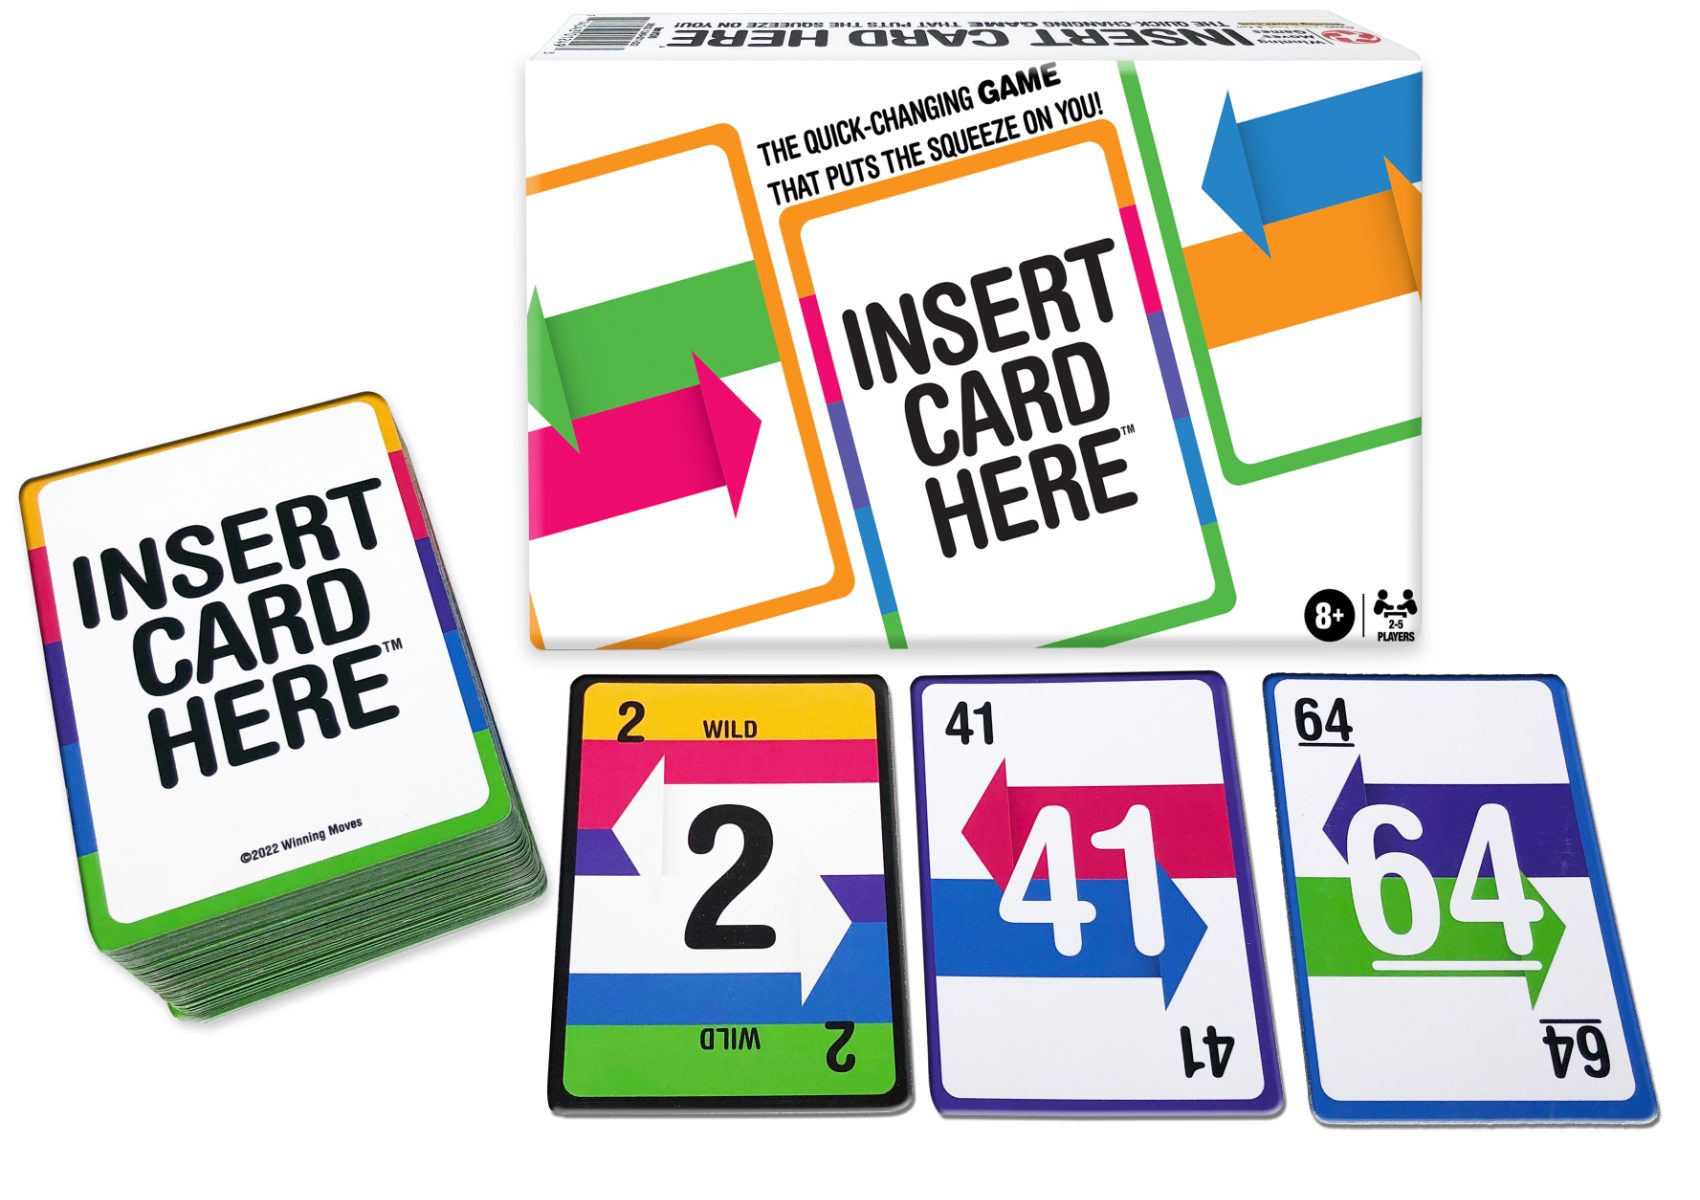 Insert Card Here game box showing a deck of cards and the three cards laid out next to each other as if the game is going to be played.